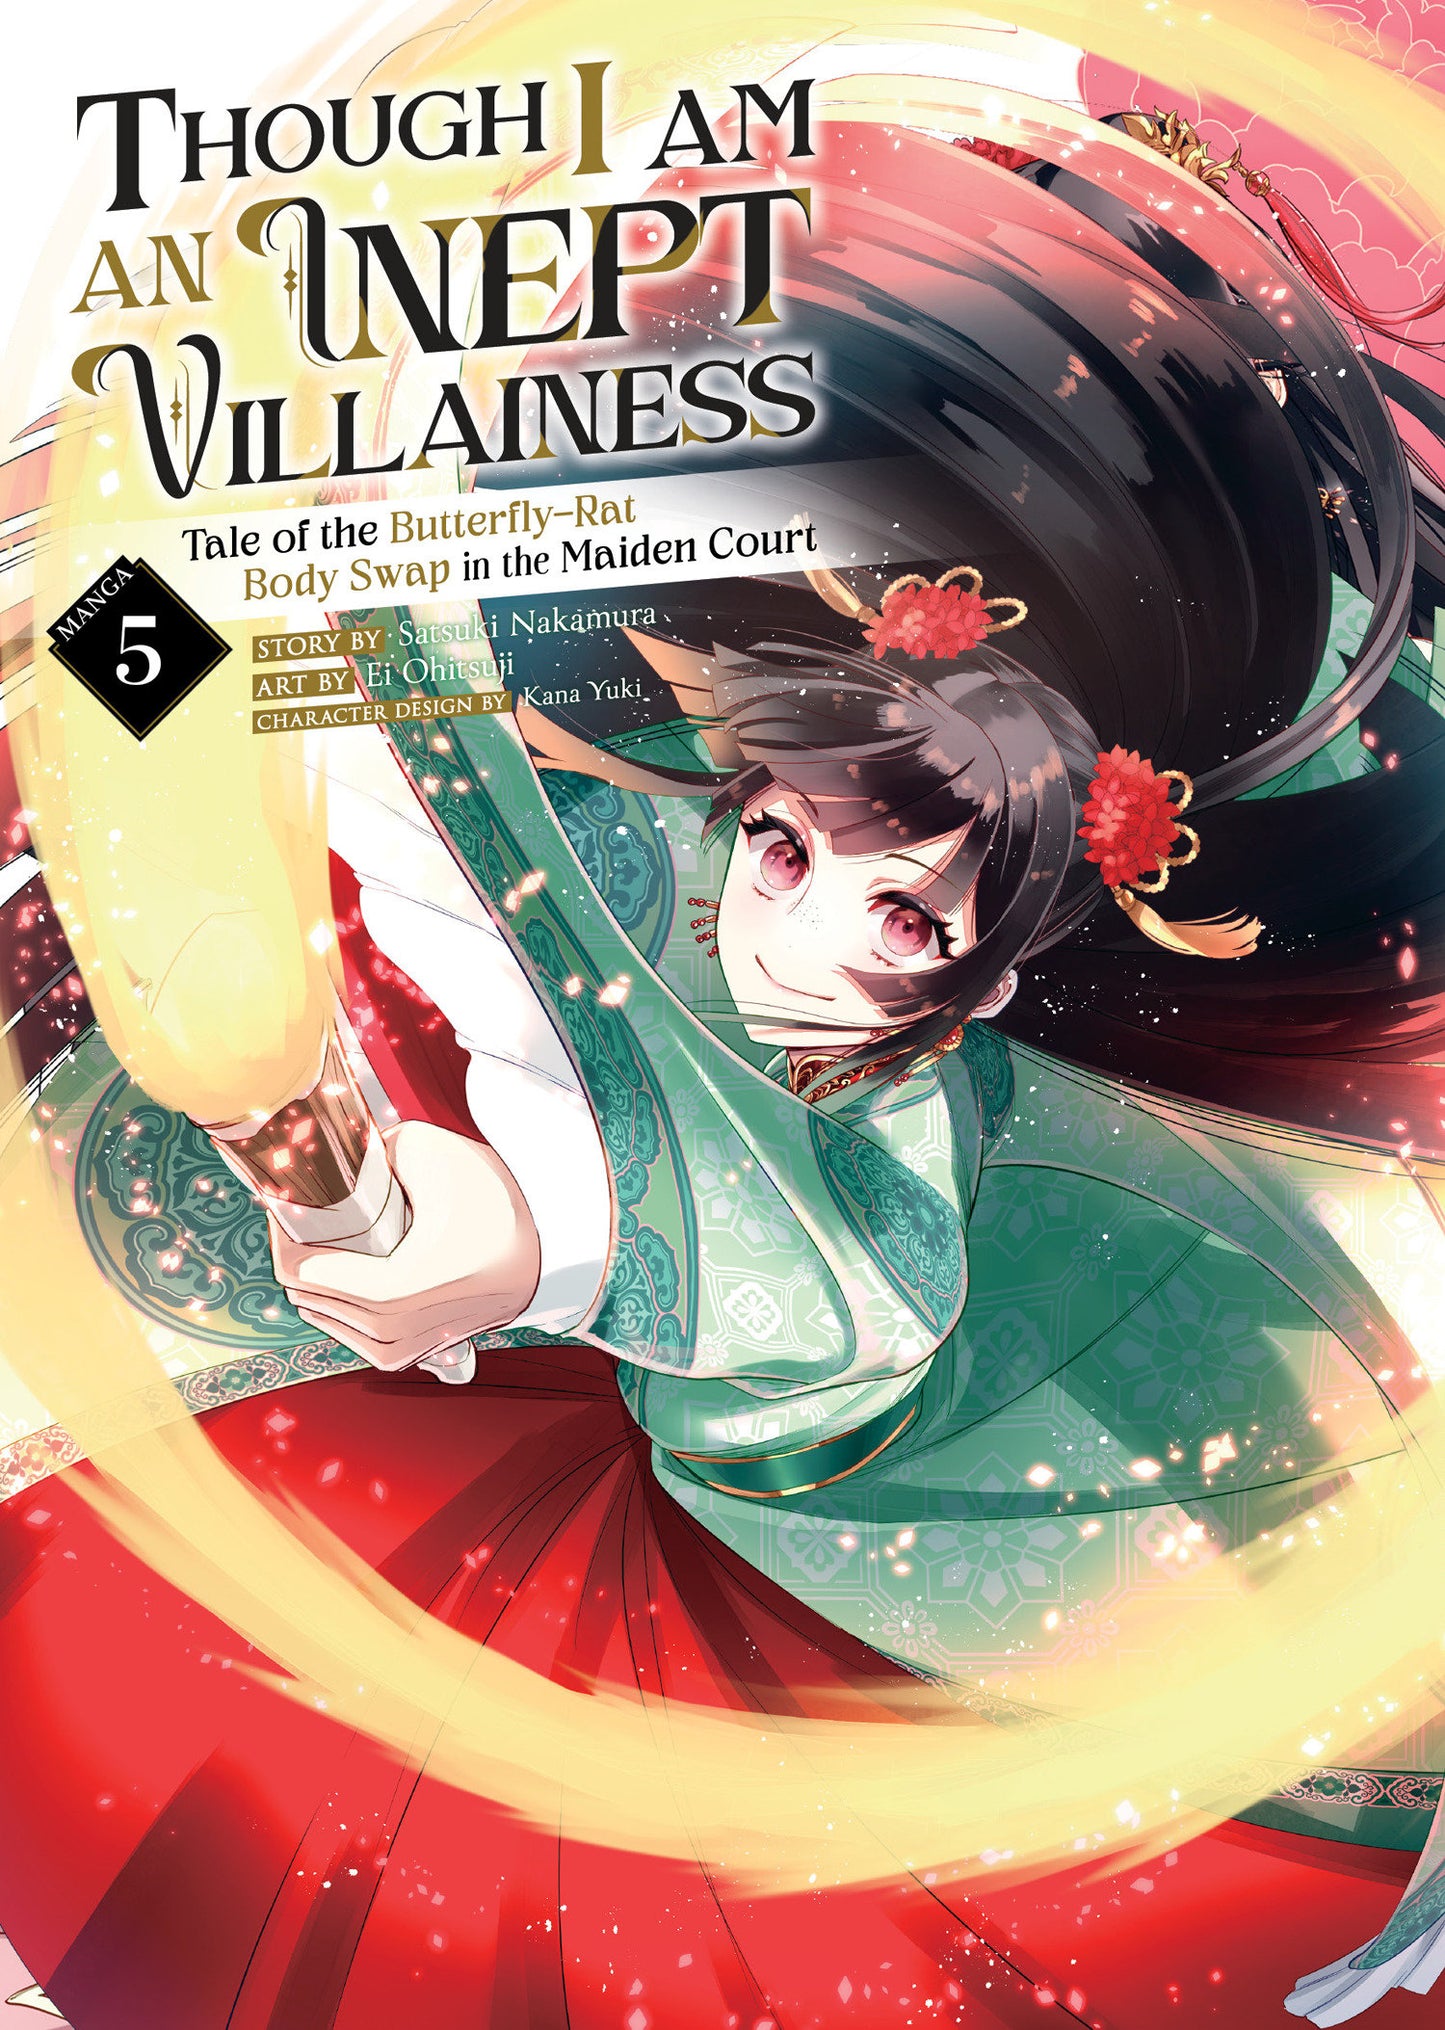 Though I Am an Inept Villainess: Tale of the Butterfly-Rat Body Swap in the Maiden Court (Manga) Vol. 5 - Release Date:  5/21/24